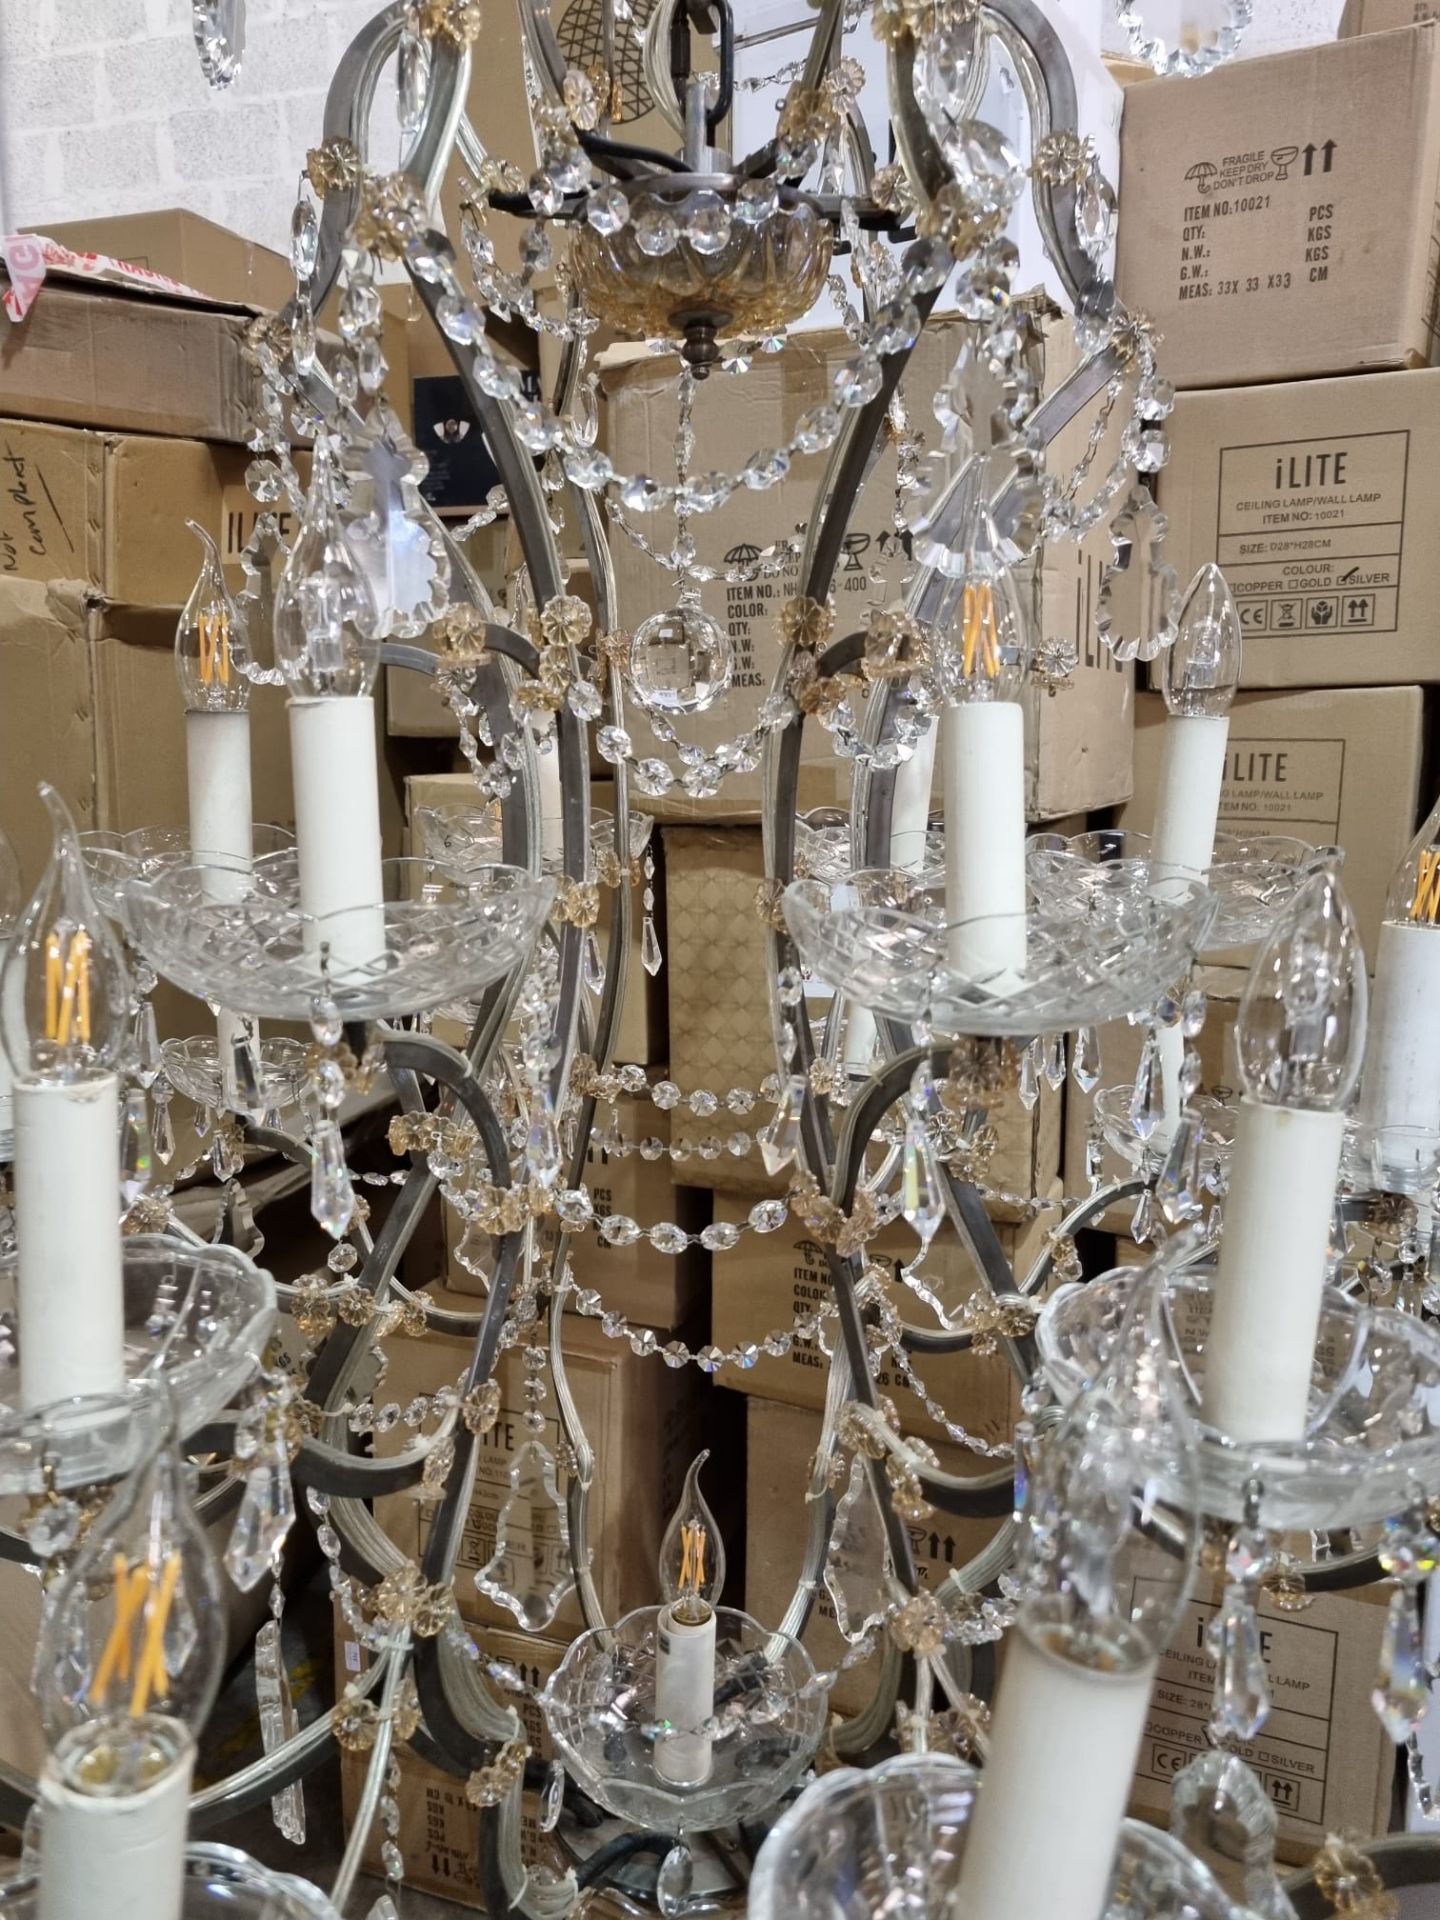 Huge Crystal 24 Arm Chandelier The Crystal Chandelier collection is inspired by the elaborate - Image 7 of 9